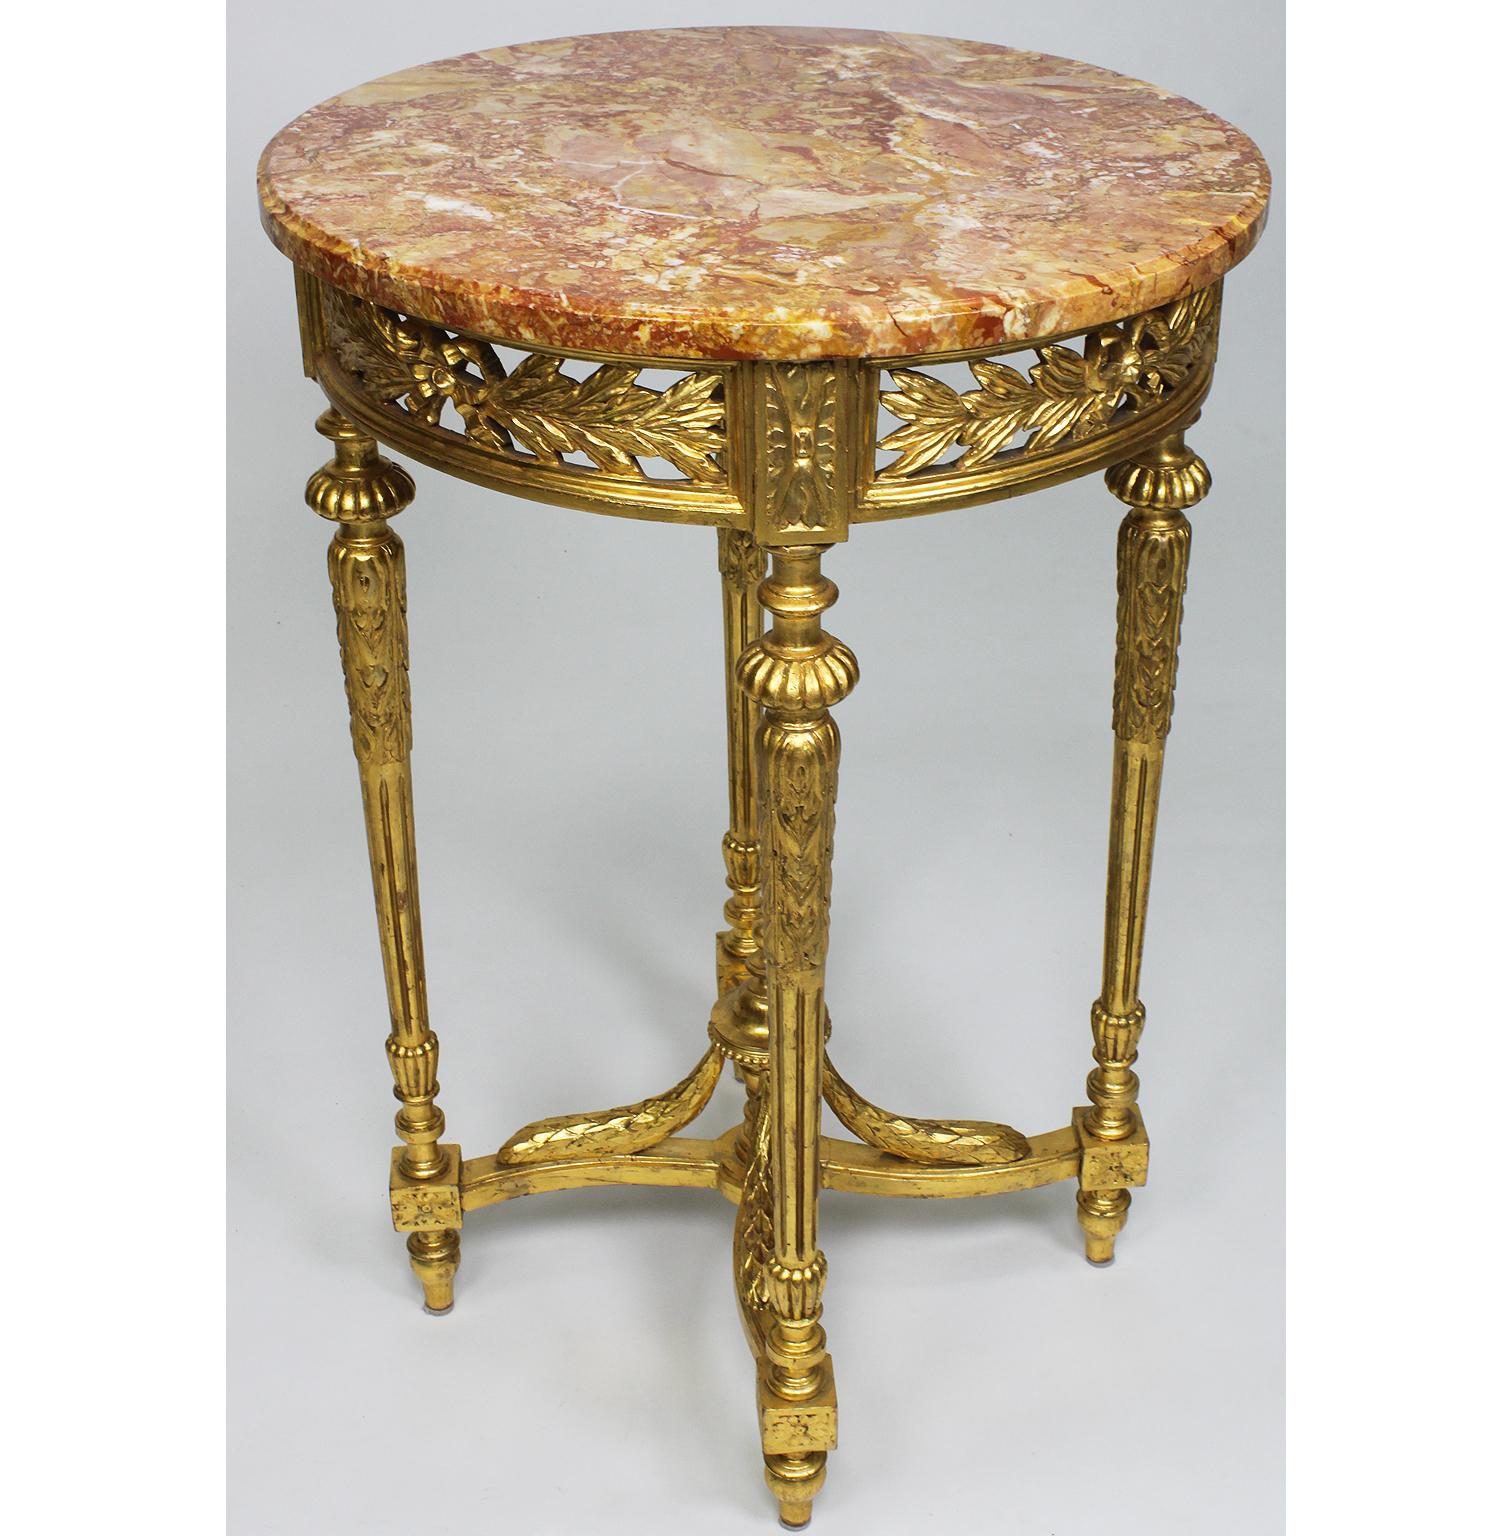 A French Louis XVI Style Gilt Wood Carved Guéridon Side Table with Marble Top. The circular gilt wood carved apron with an acanthus tied leaf wreath, raised on four fluted carved legs conjoined with a stretcher centered with an urn finial surmounted